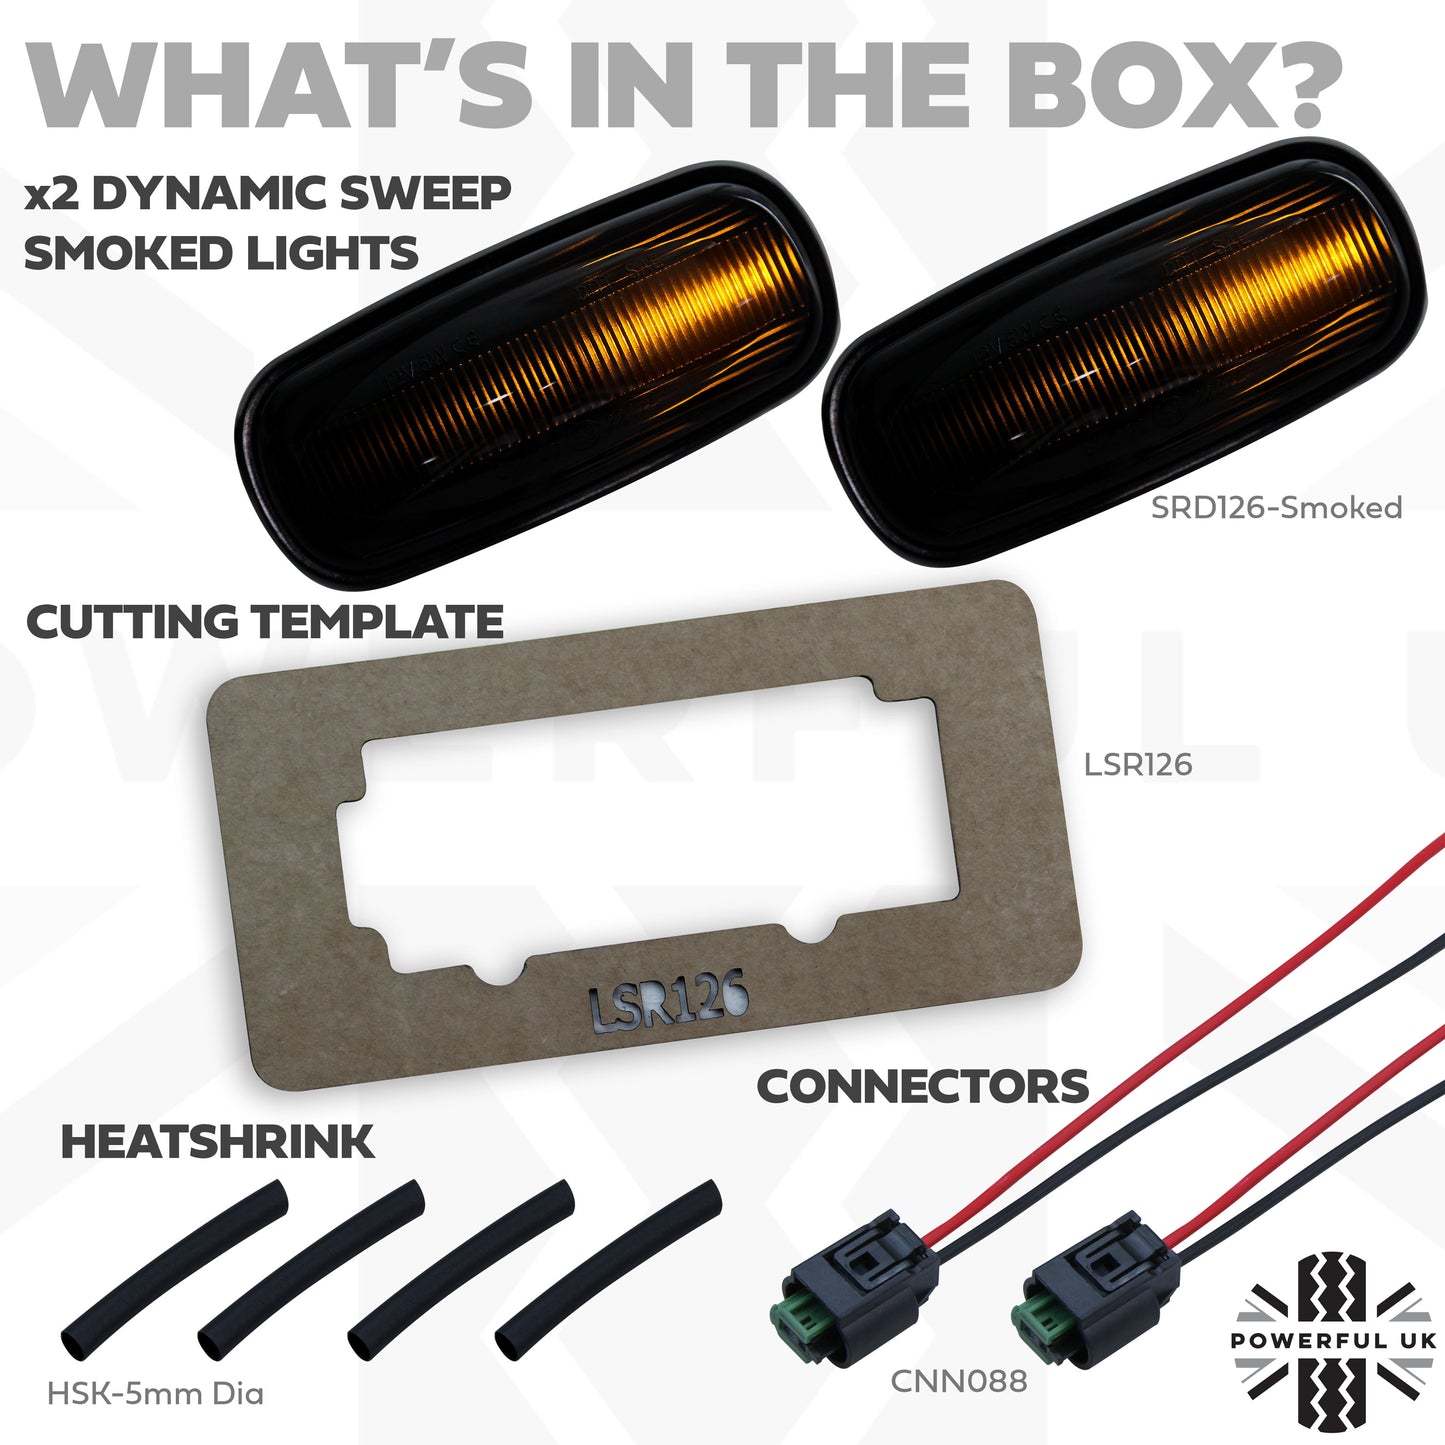 Side Repeaters Conversion Kit - LED - Smoked - Dynamic Sweep for Land Rover Defender